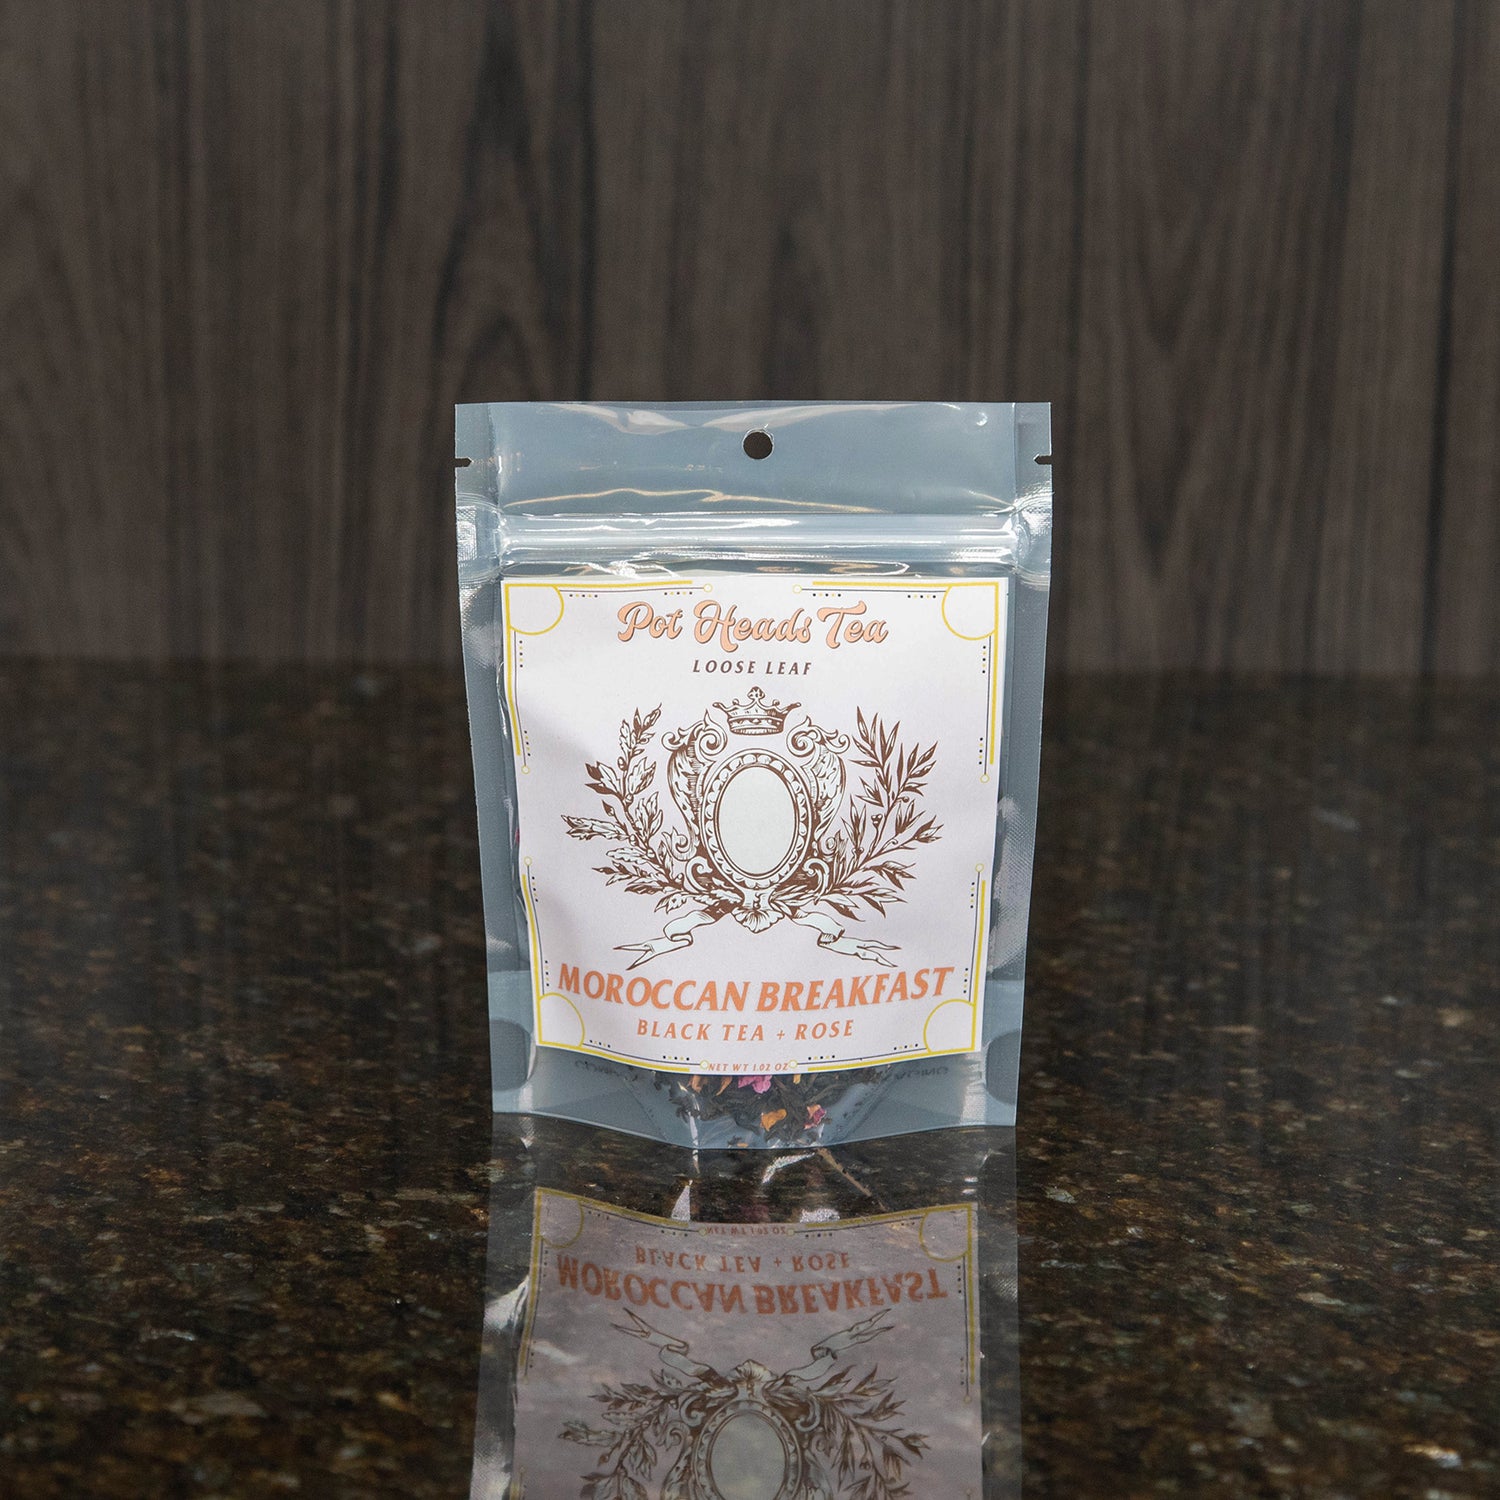 a packet of loose leaf tea with a pink label